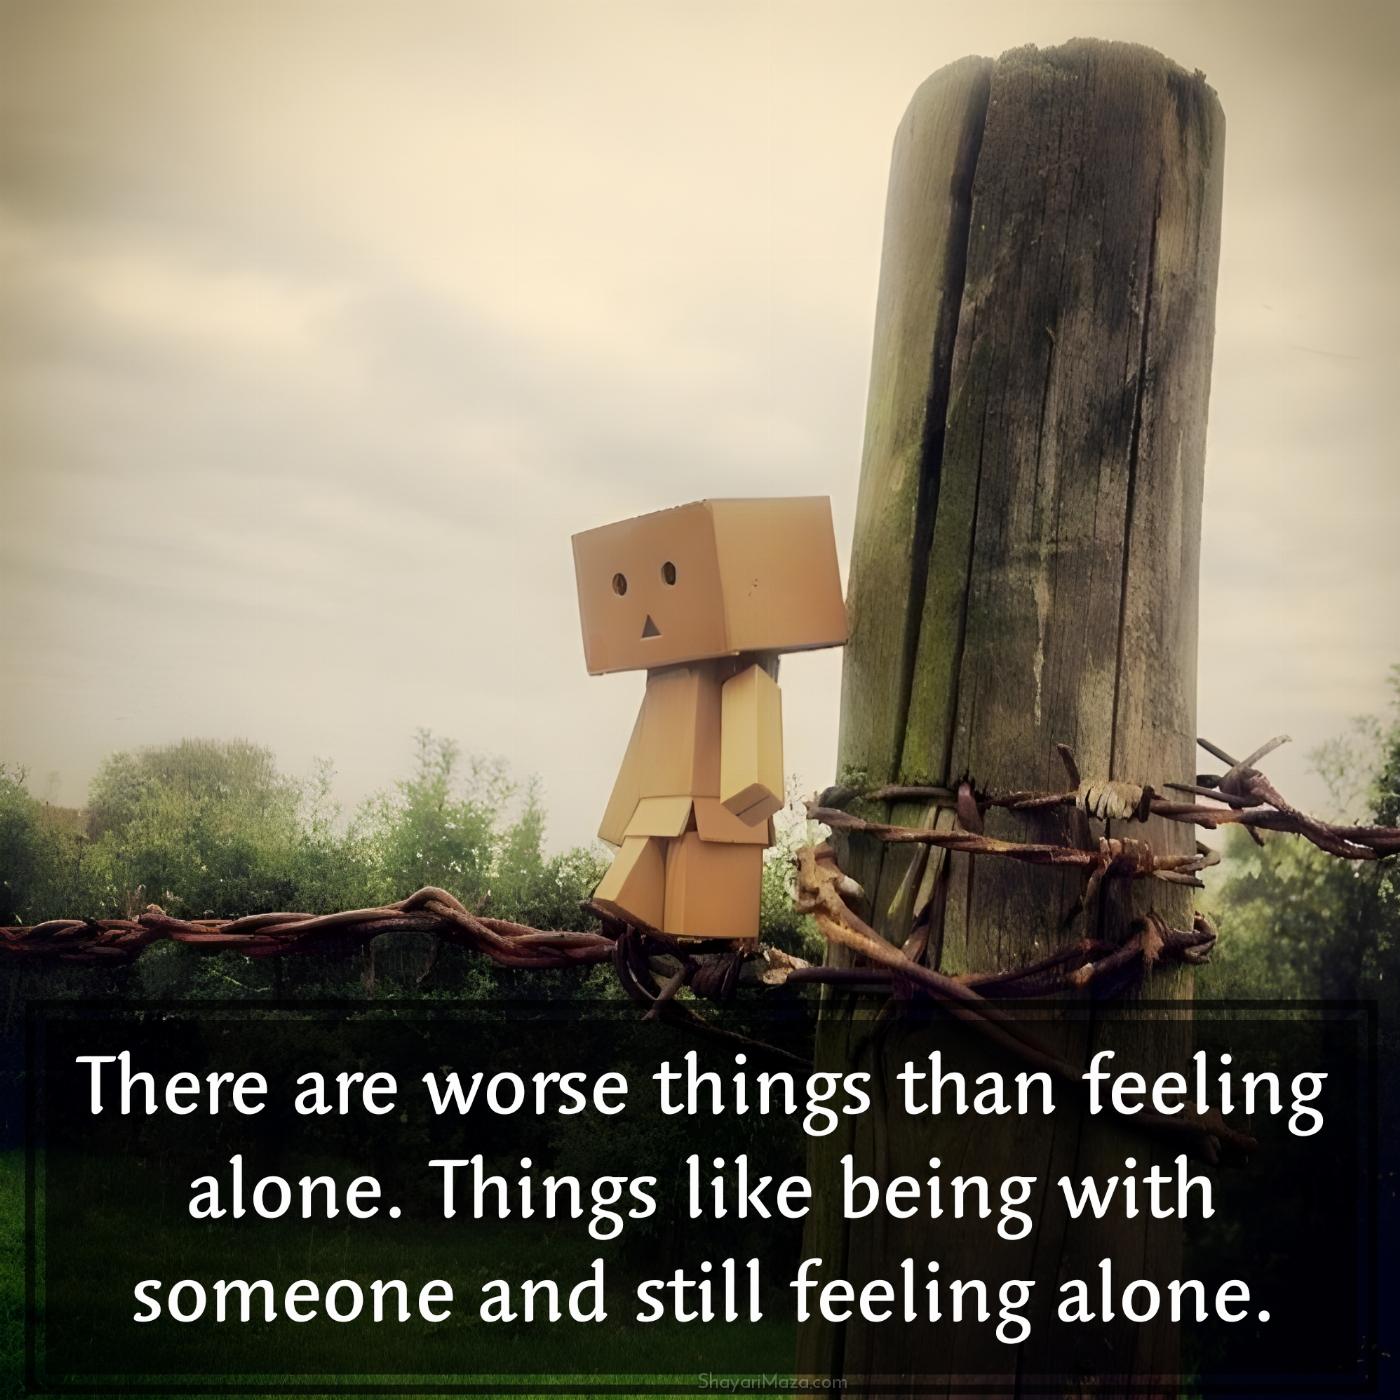 There are worse things than feeling alone